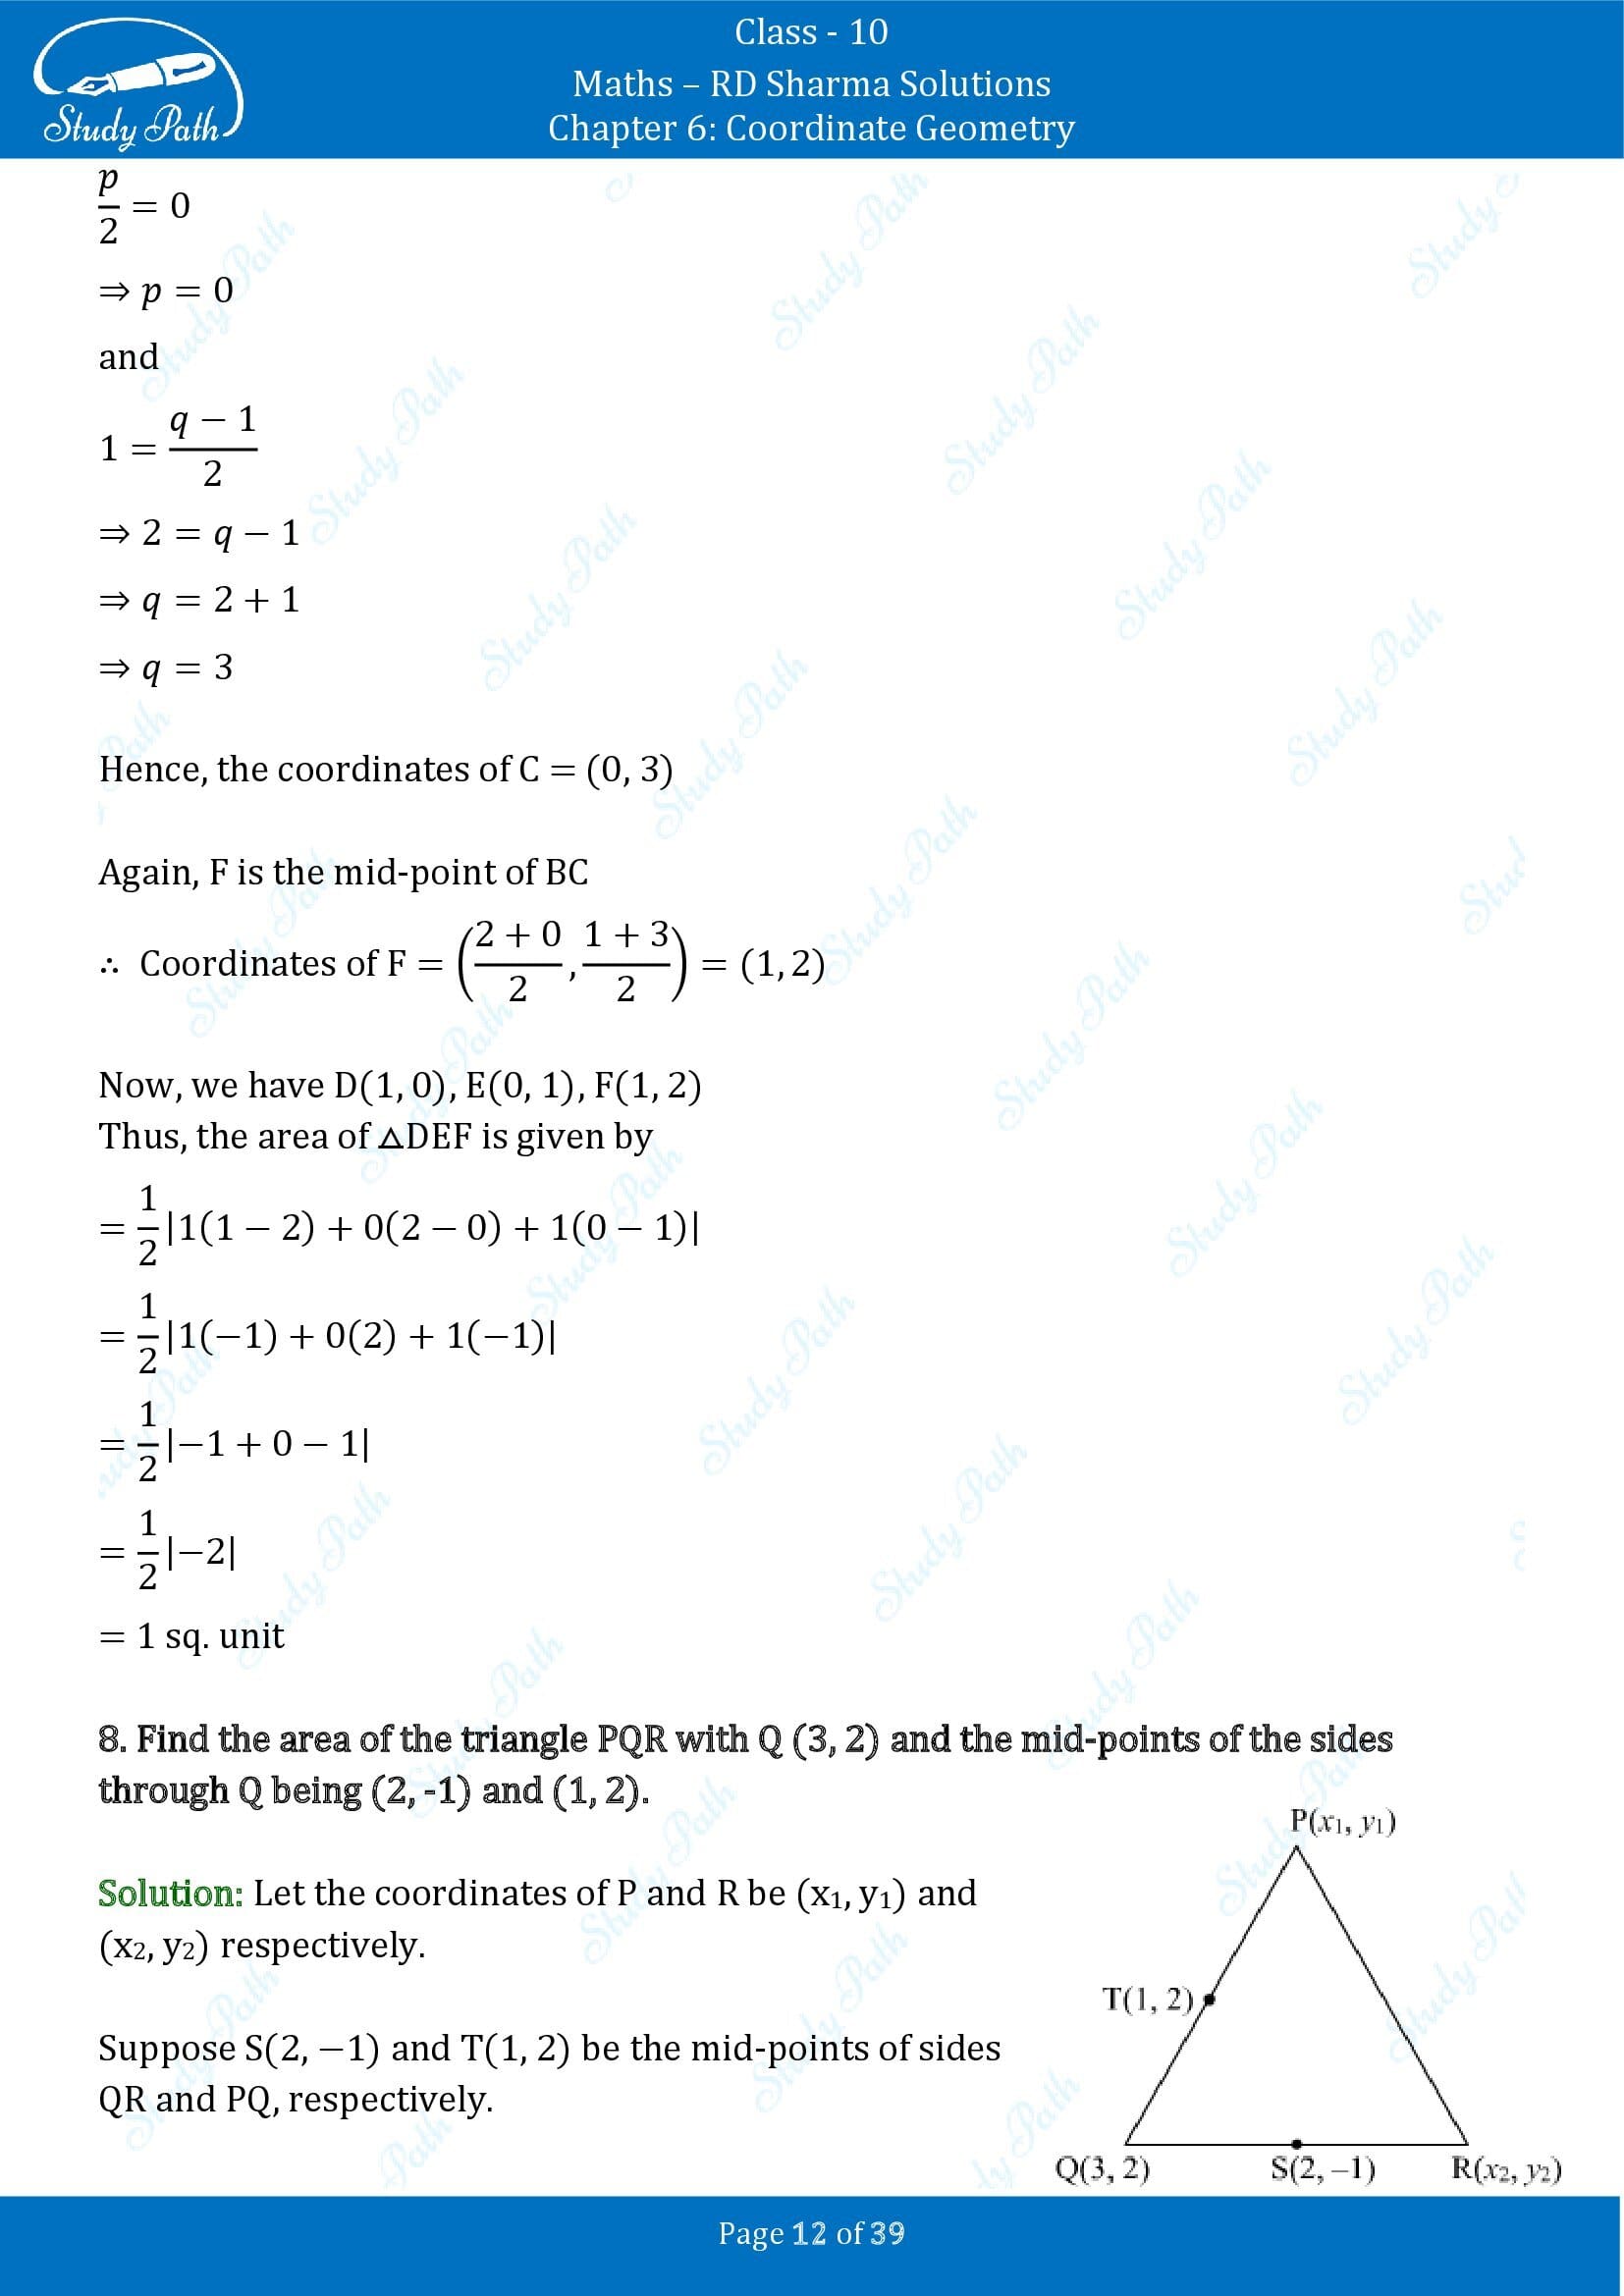 RD Sharma Solutions Class 10 Chapter 6 Coordinate Geometry Exercise 6.5 0012